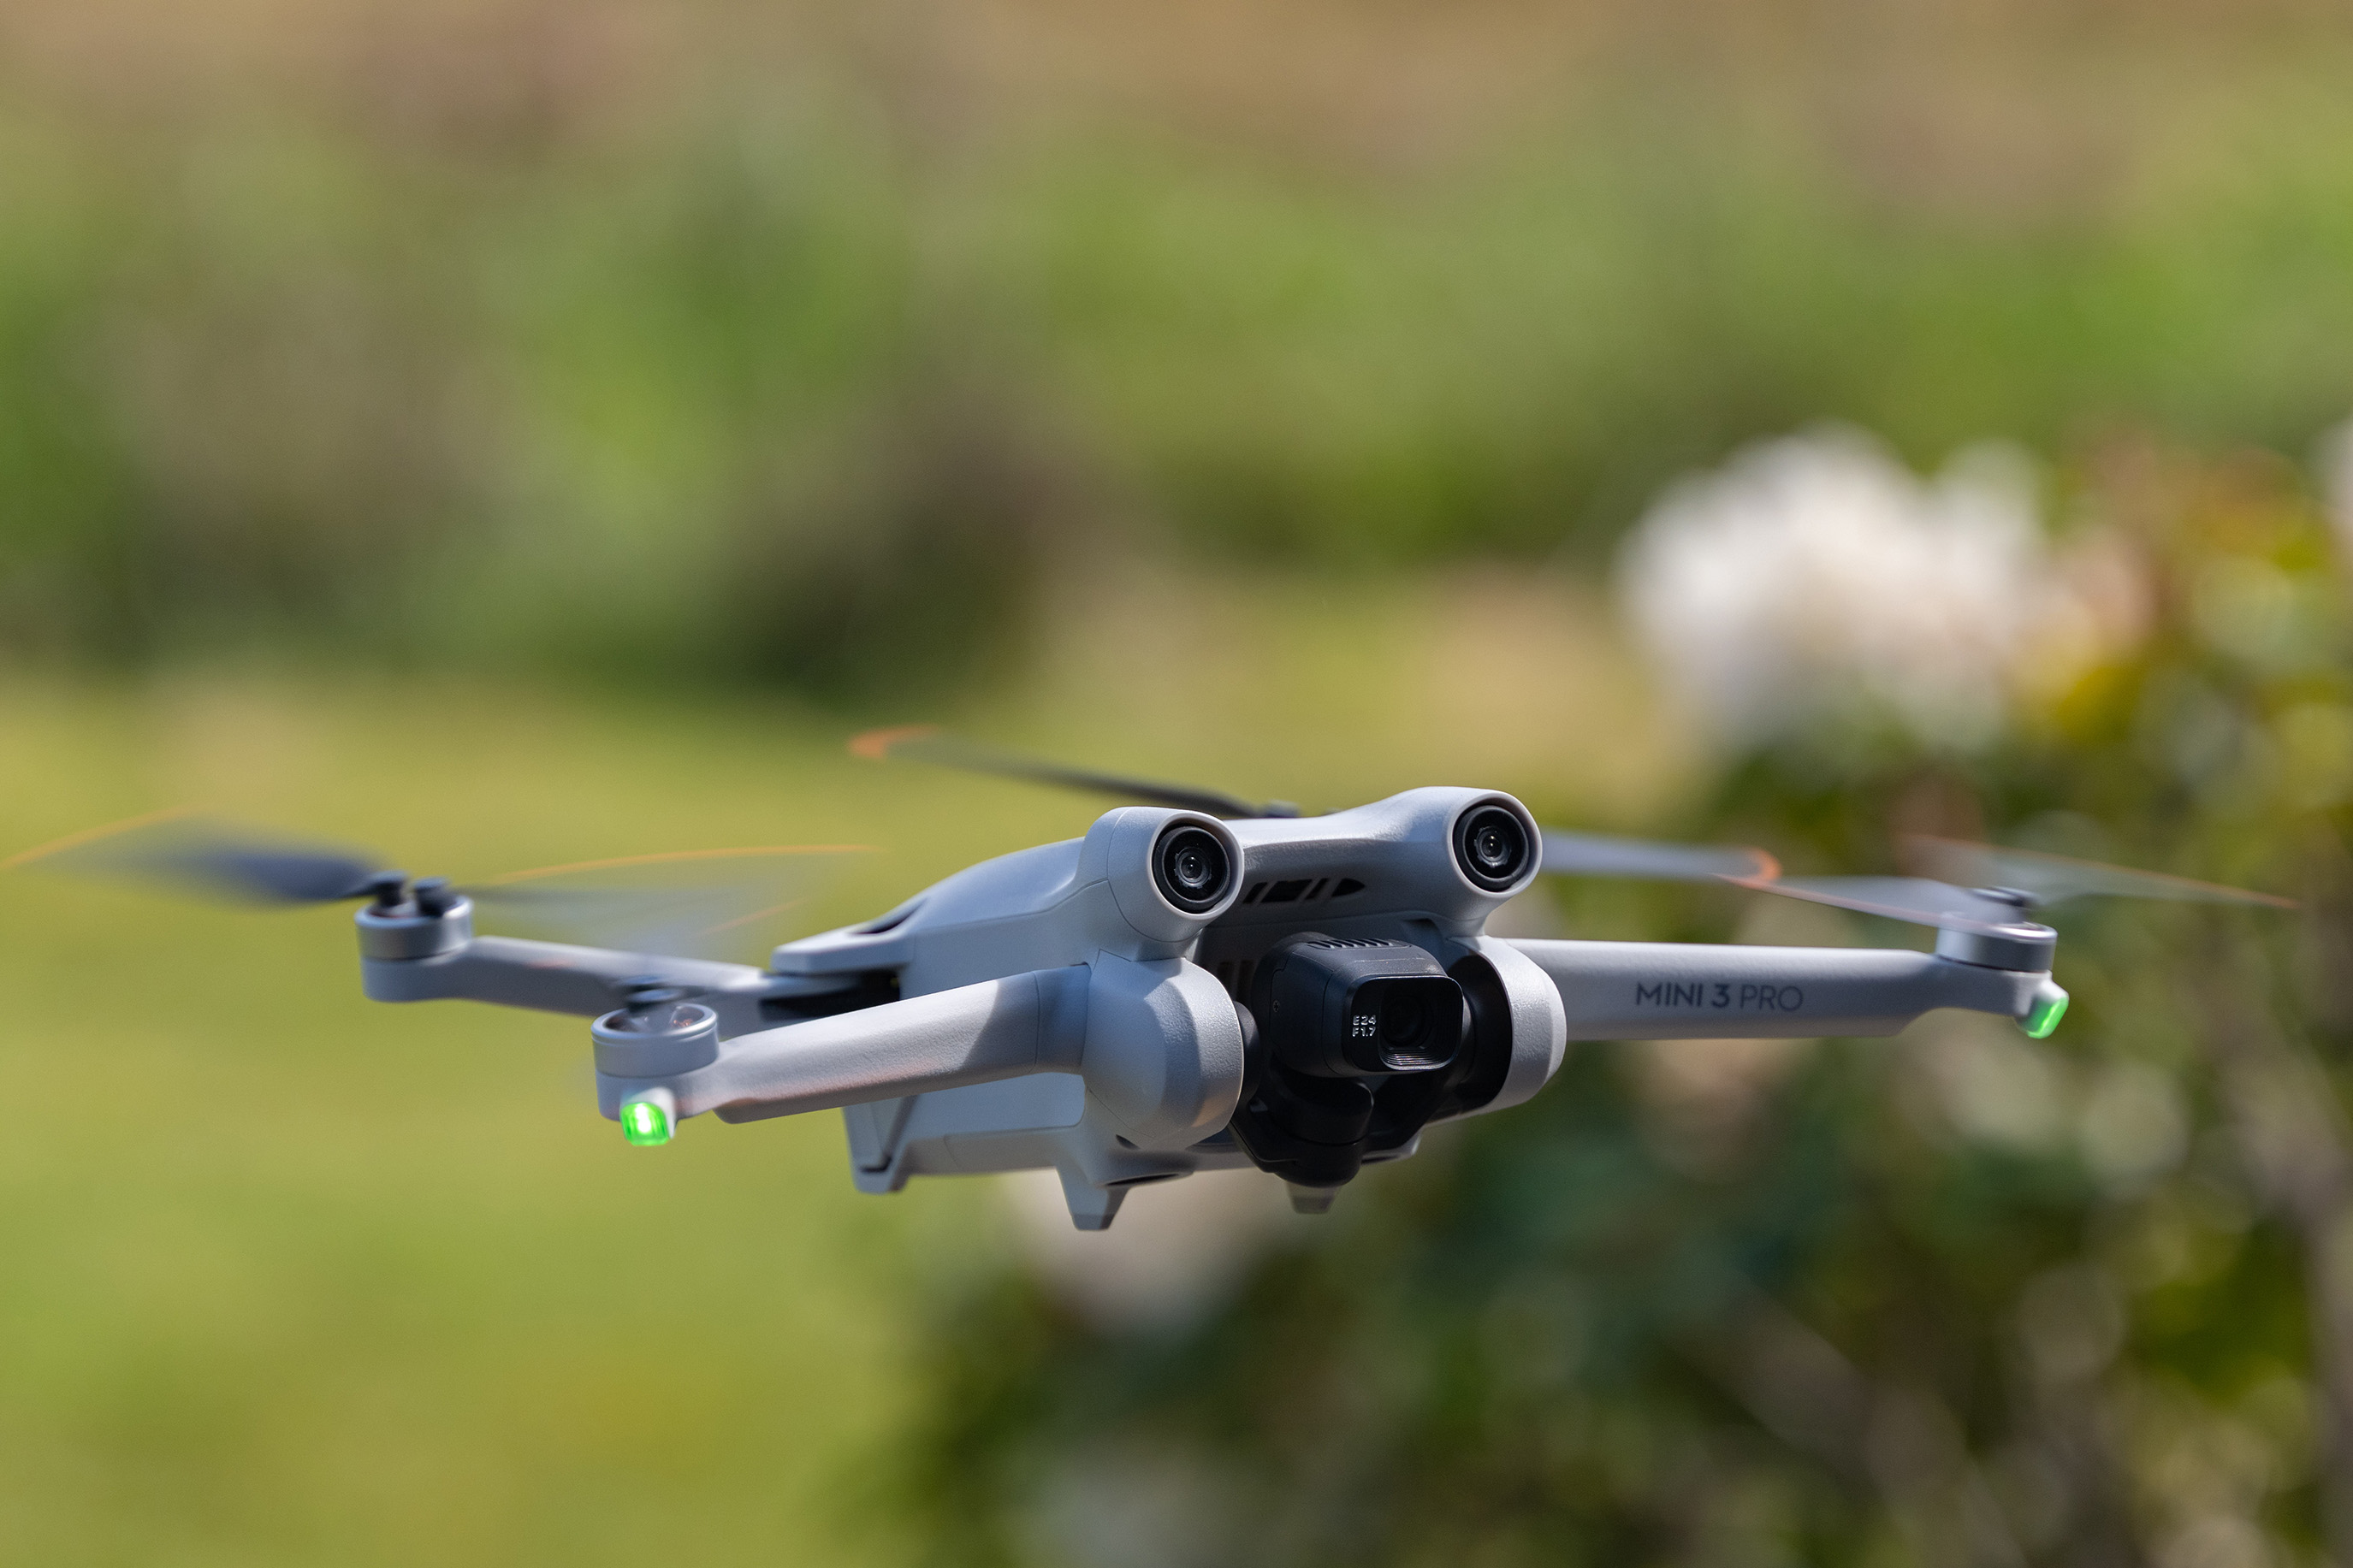 Best Drone Deals: Get and Digital Drone for Cheap | a Trends More $49